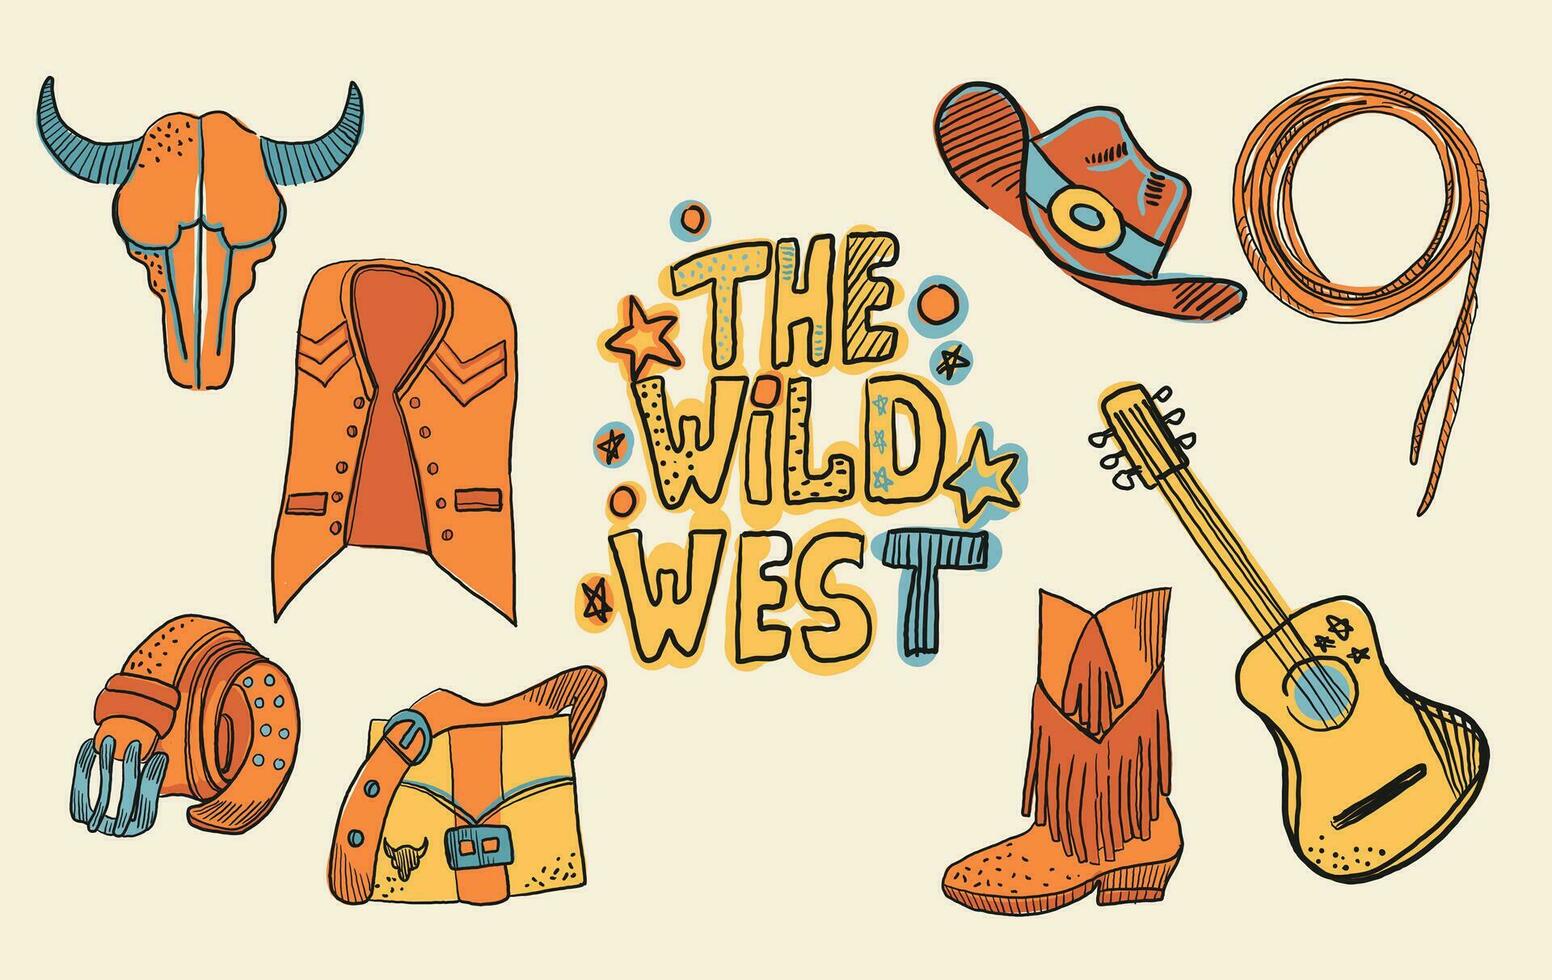 Cowboy western theme wild west concept. Includes elements such as a bull skull, belt, guitar, loss, hat, shoe, guitar, bag, and vest. Vector